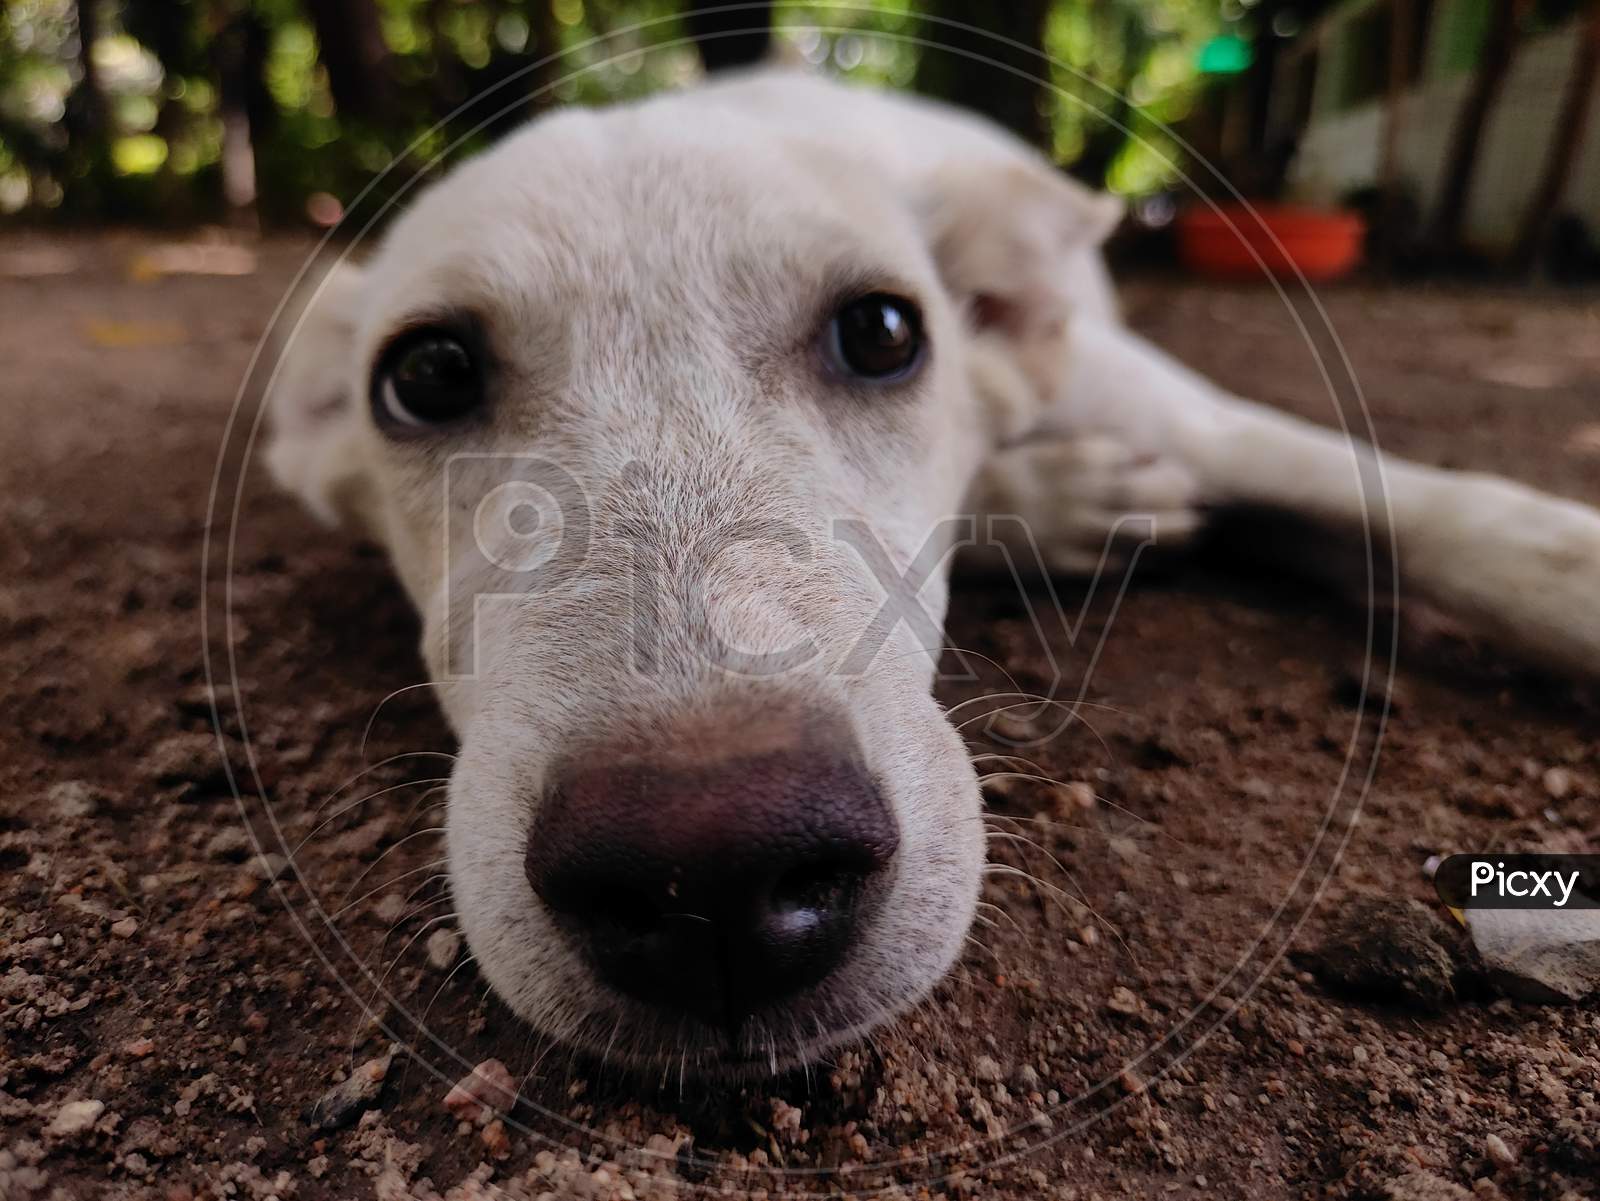 Eyes and nose of a white street dog